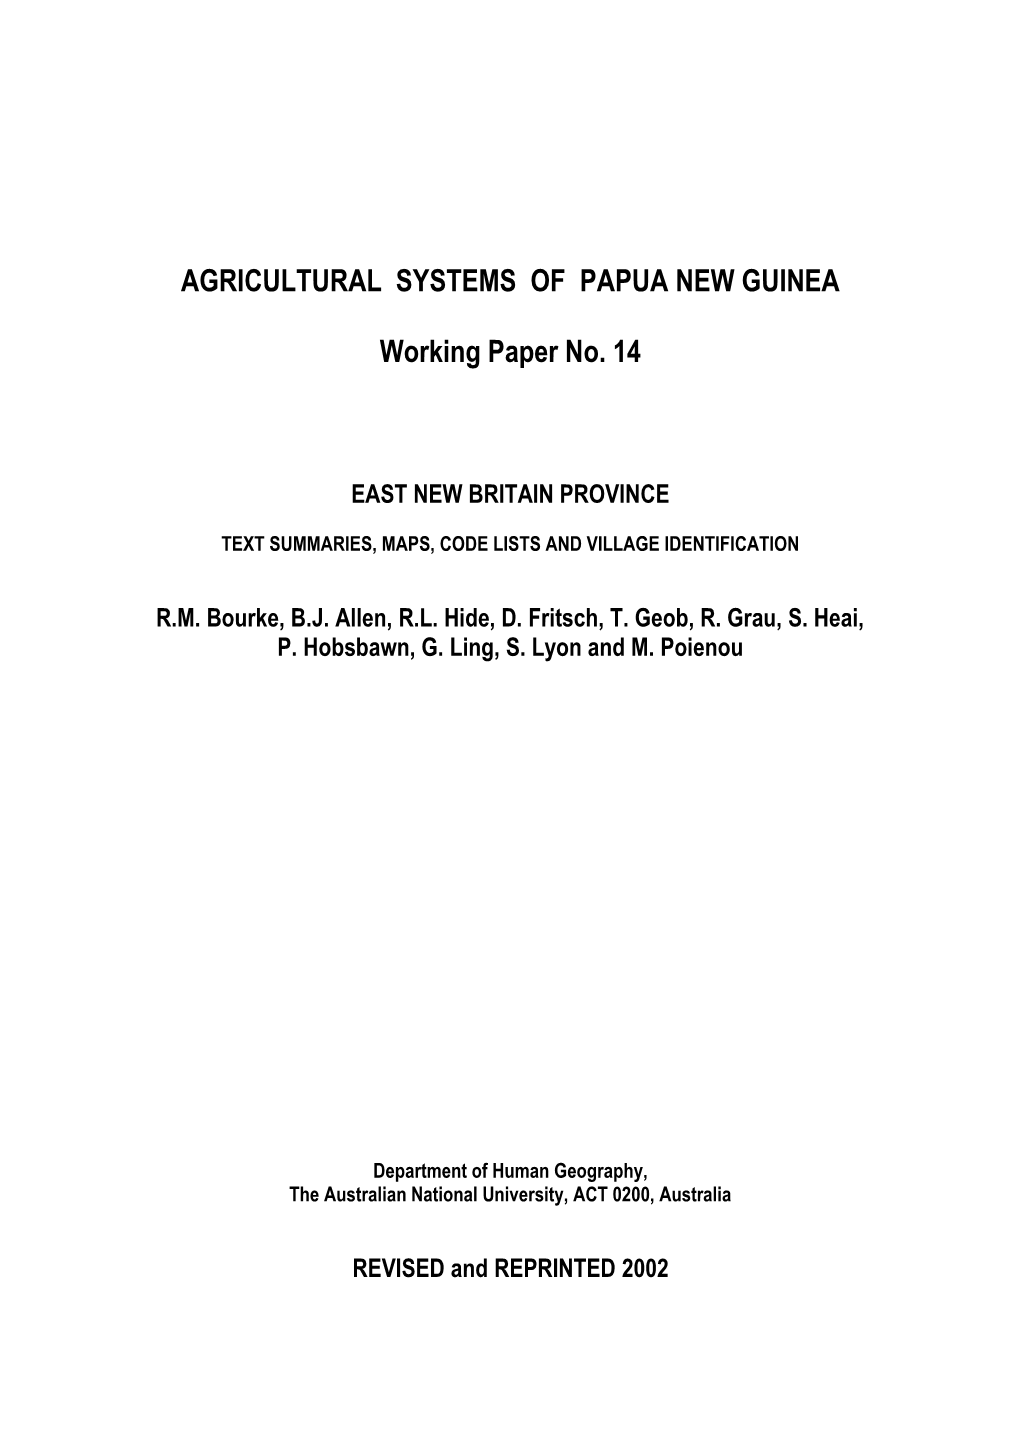 Agricultural Systems of Papua New Guinea Working Paper No. 14